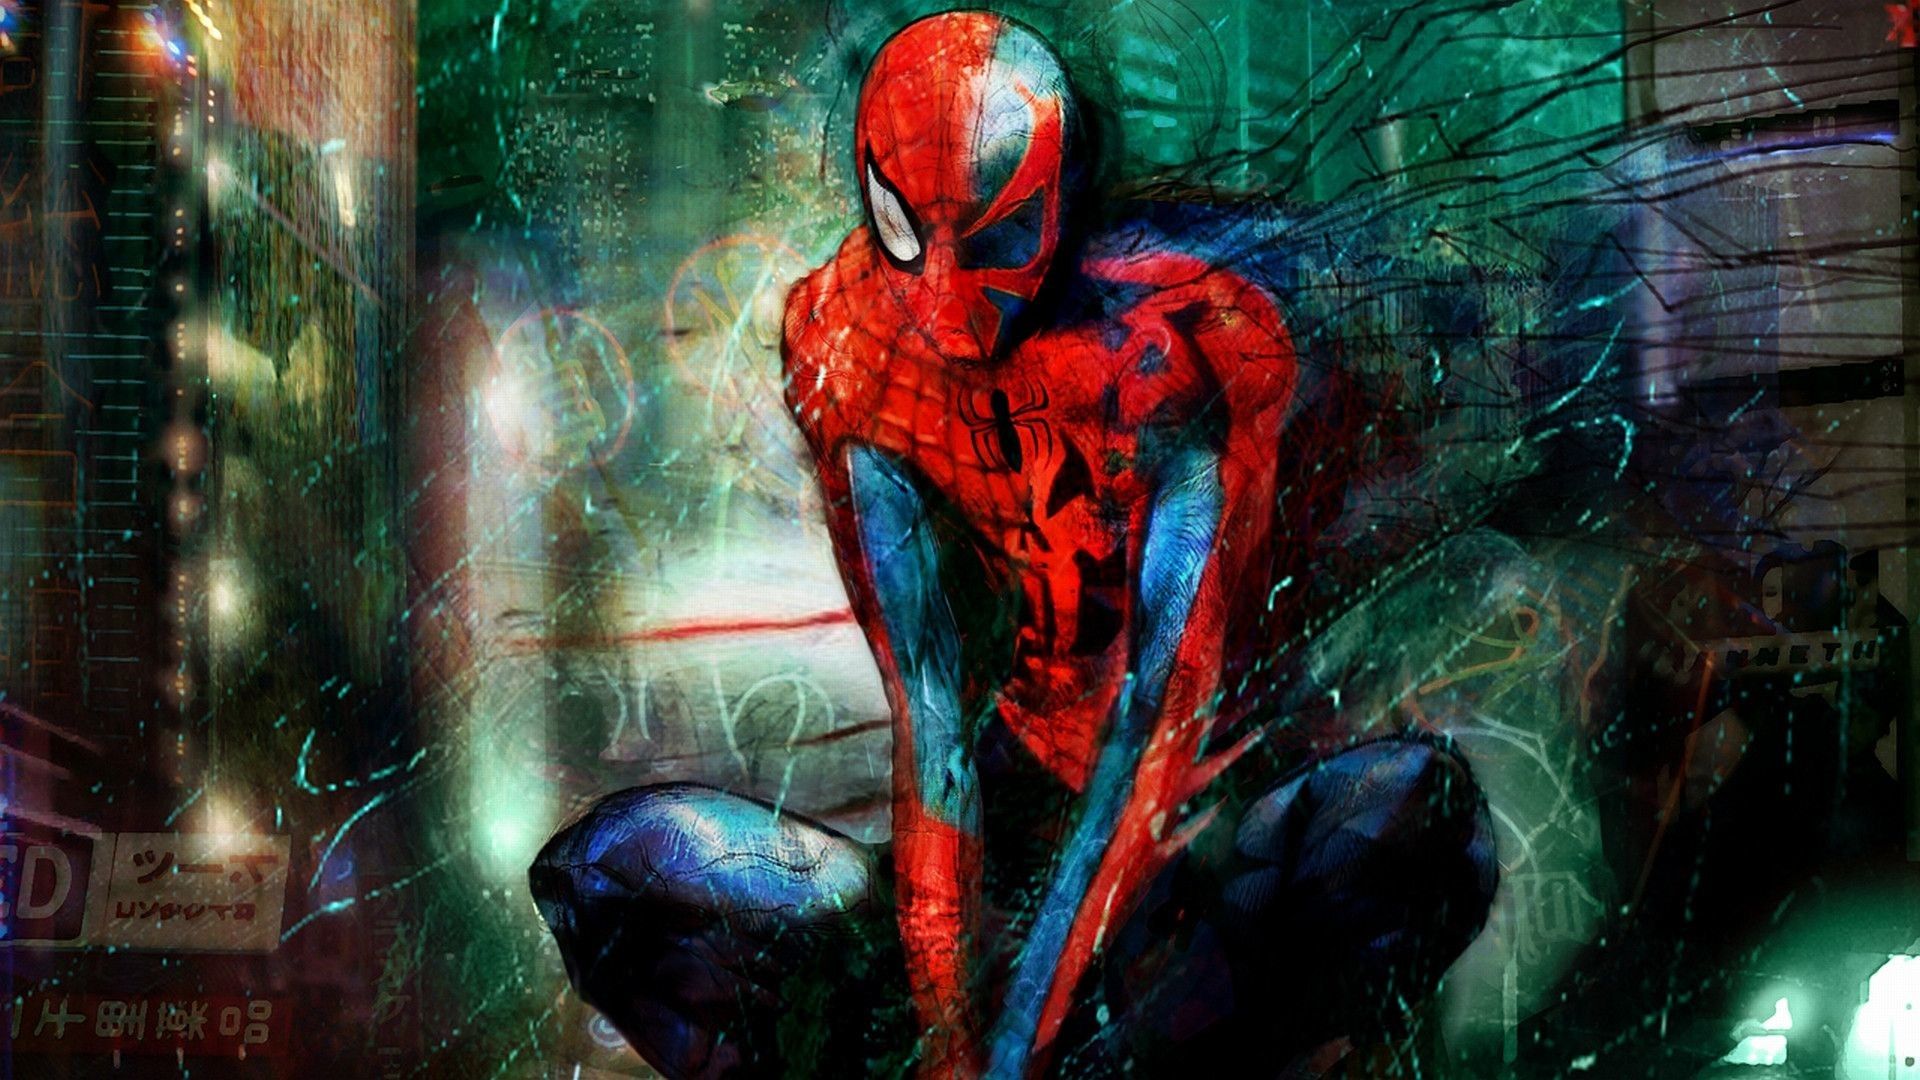 spider man edge of time pc game free download